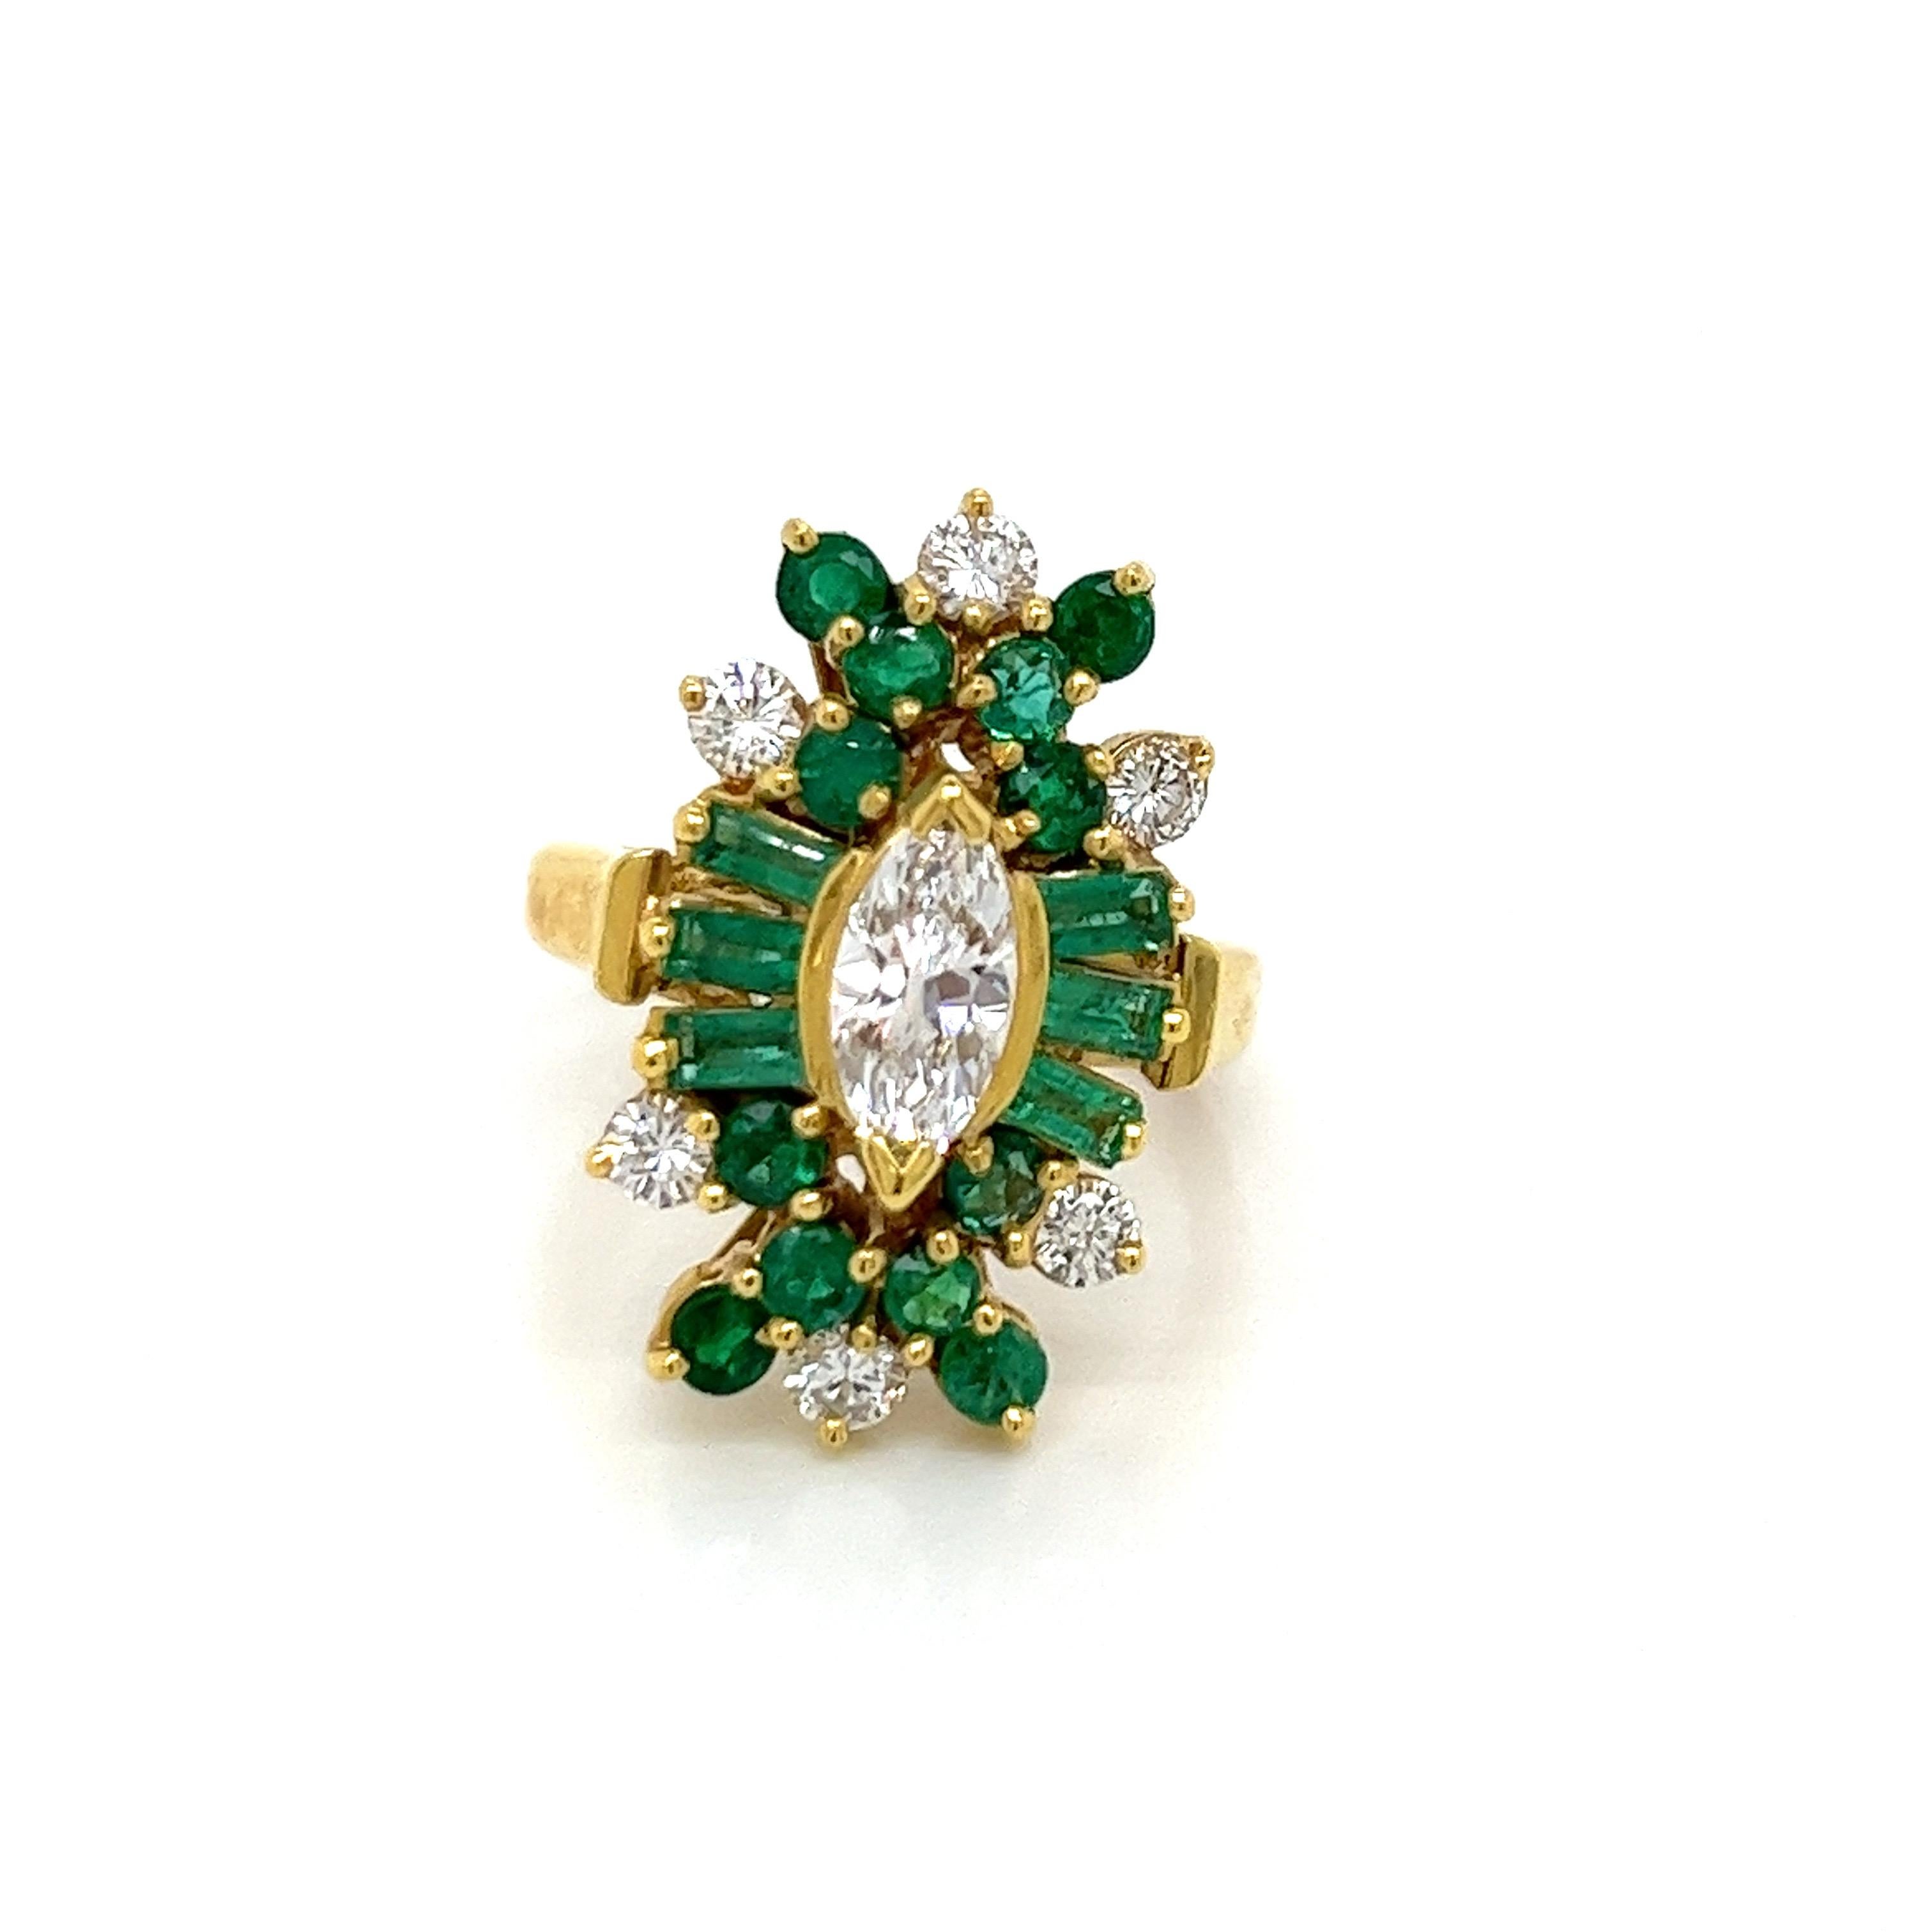 Vintage 18k yellow gold Victorian Reproduction Diamond and Emerald Ring For Sale 1